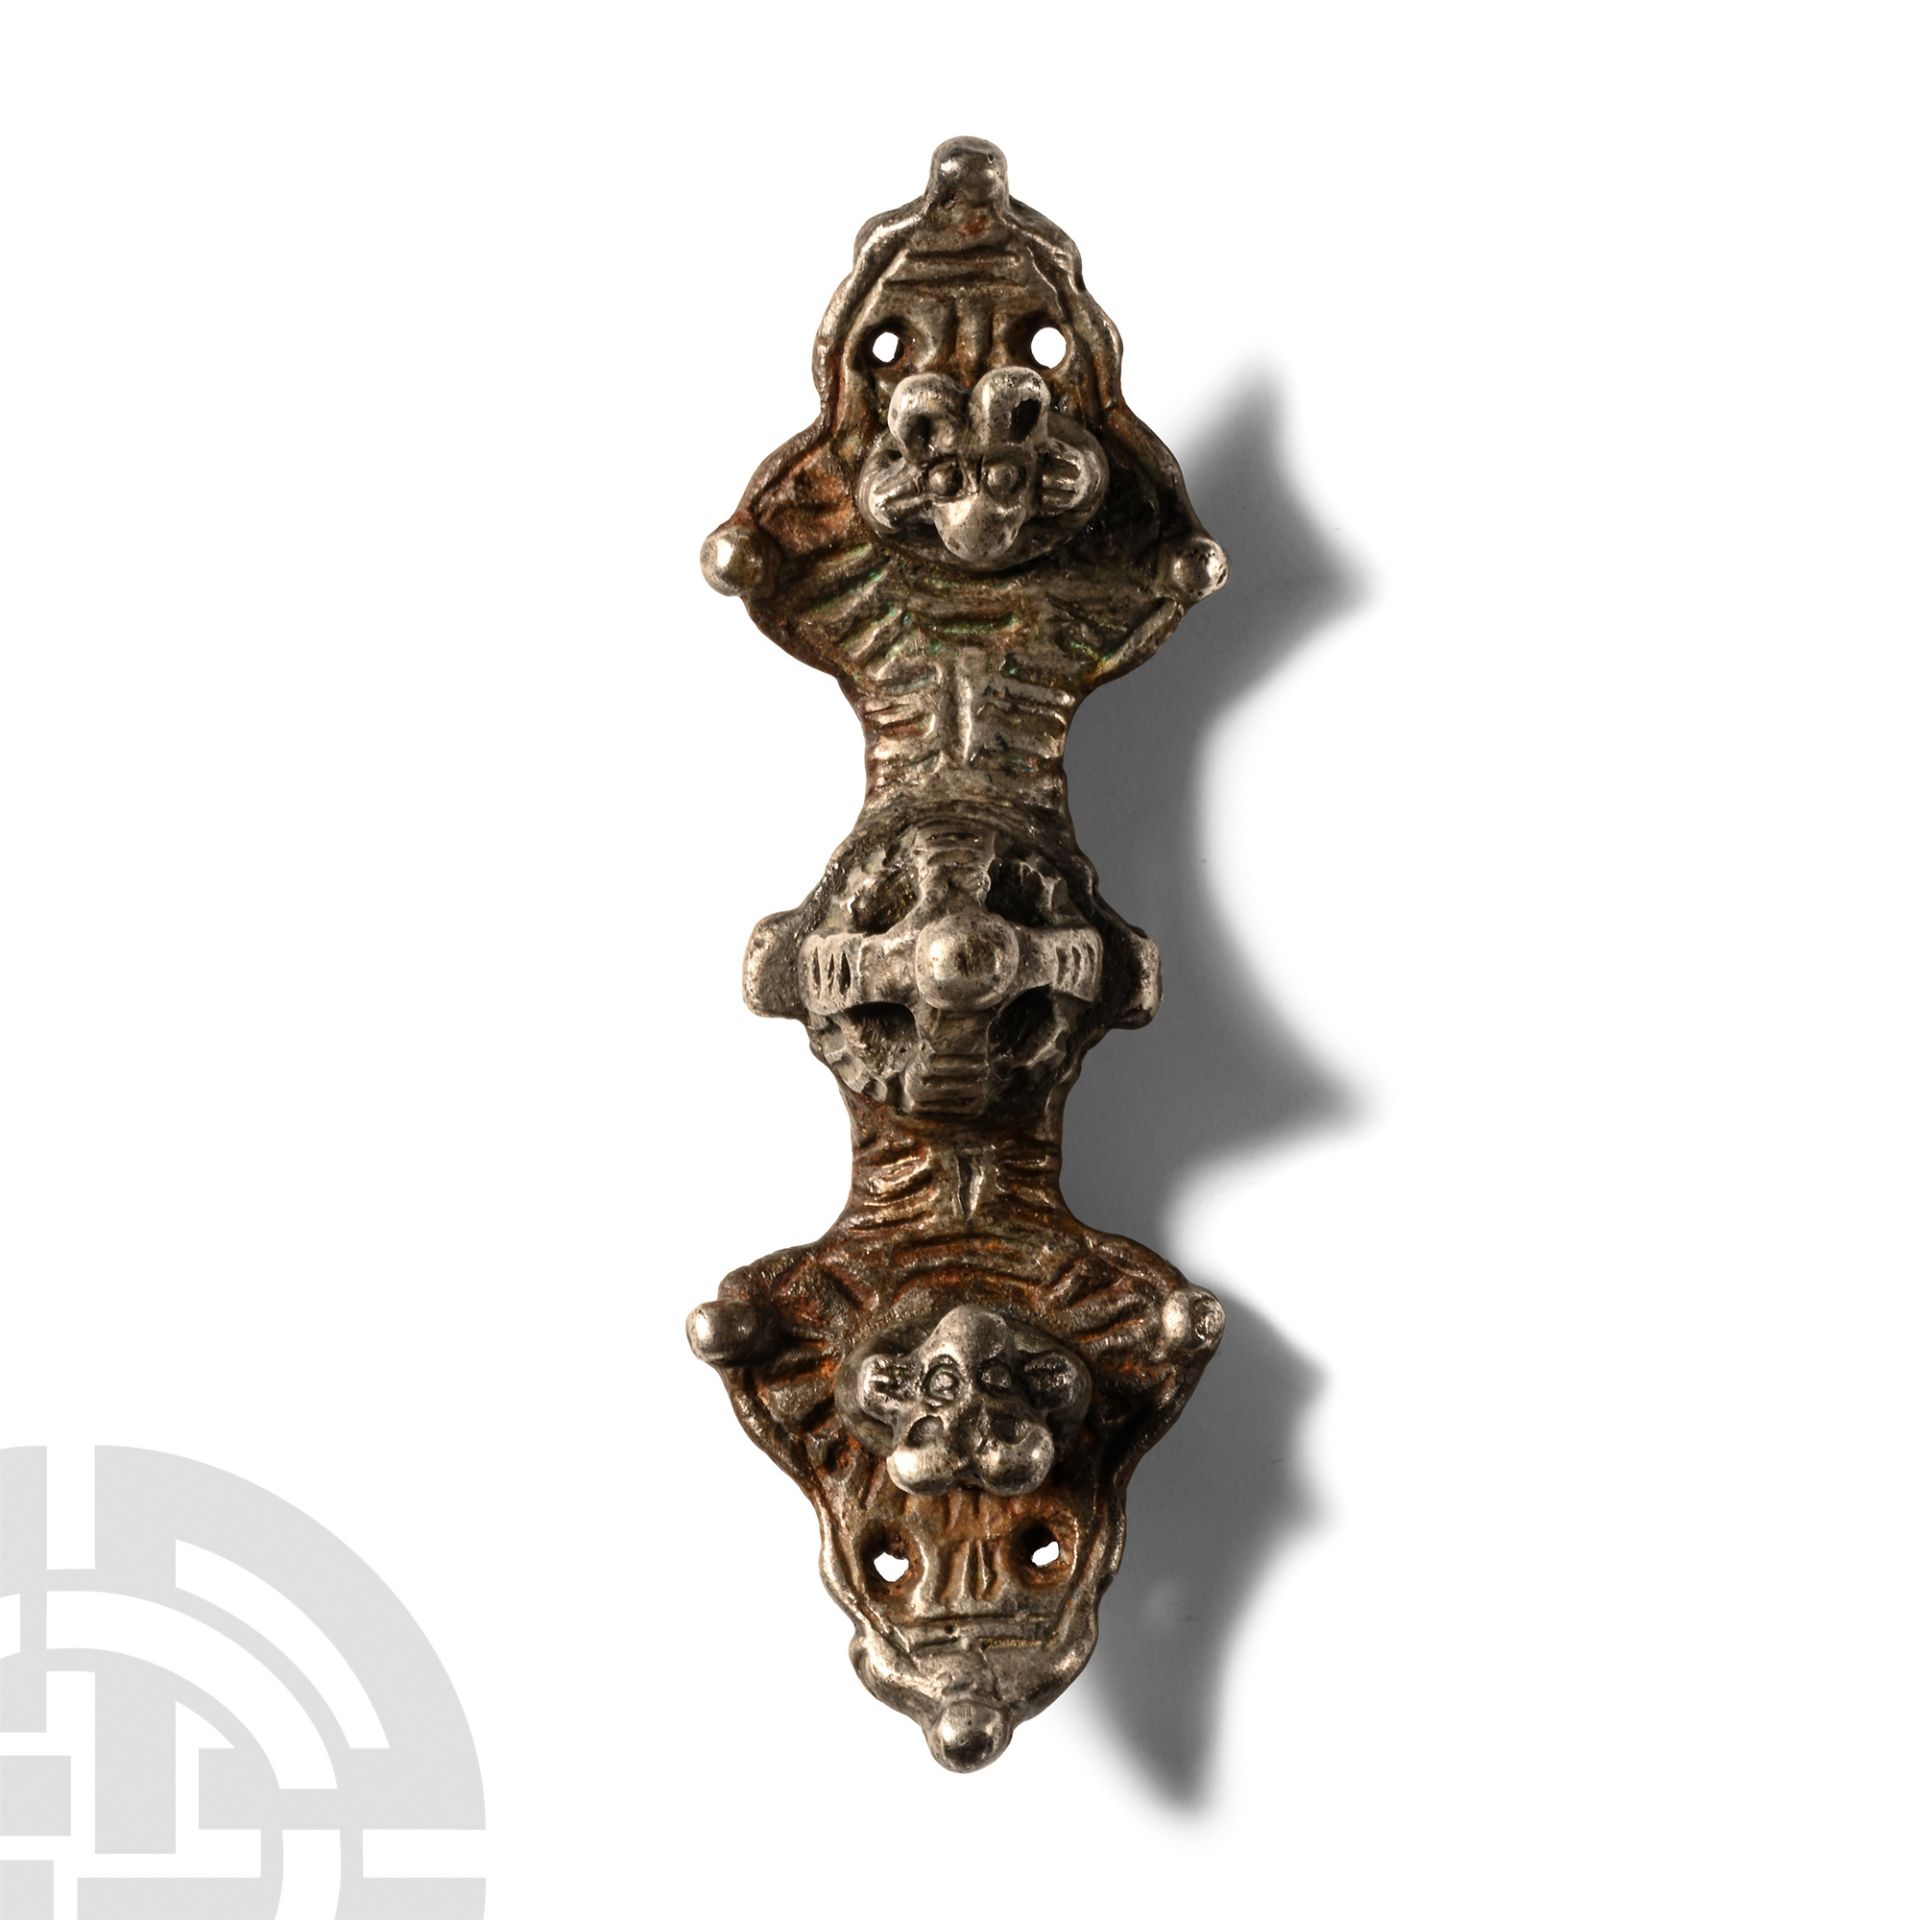 Scandinavian Viking Silver Equal-Arm Brooch with Animals